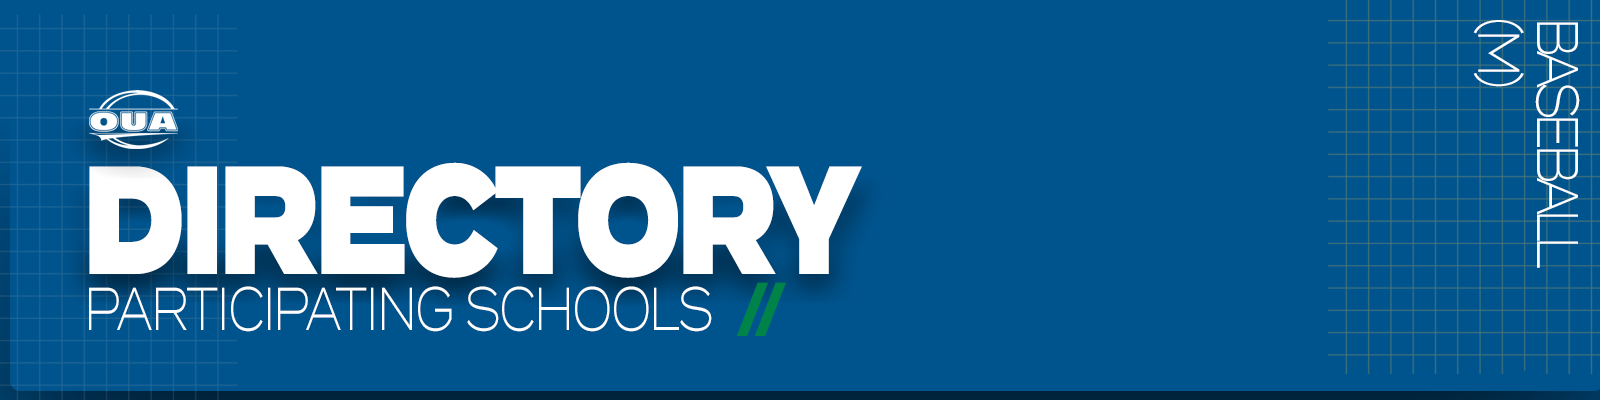 Predominantly blue graphic with large white text on the left side that reads 'Directory, Participating Schools' and small white vertical text on the right side that reads ‘Baseball’